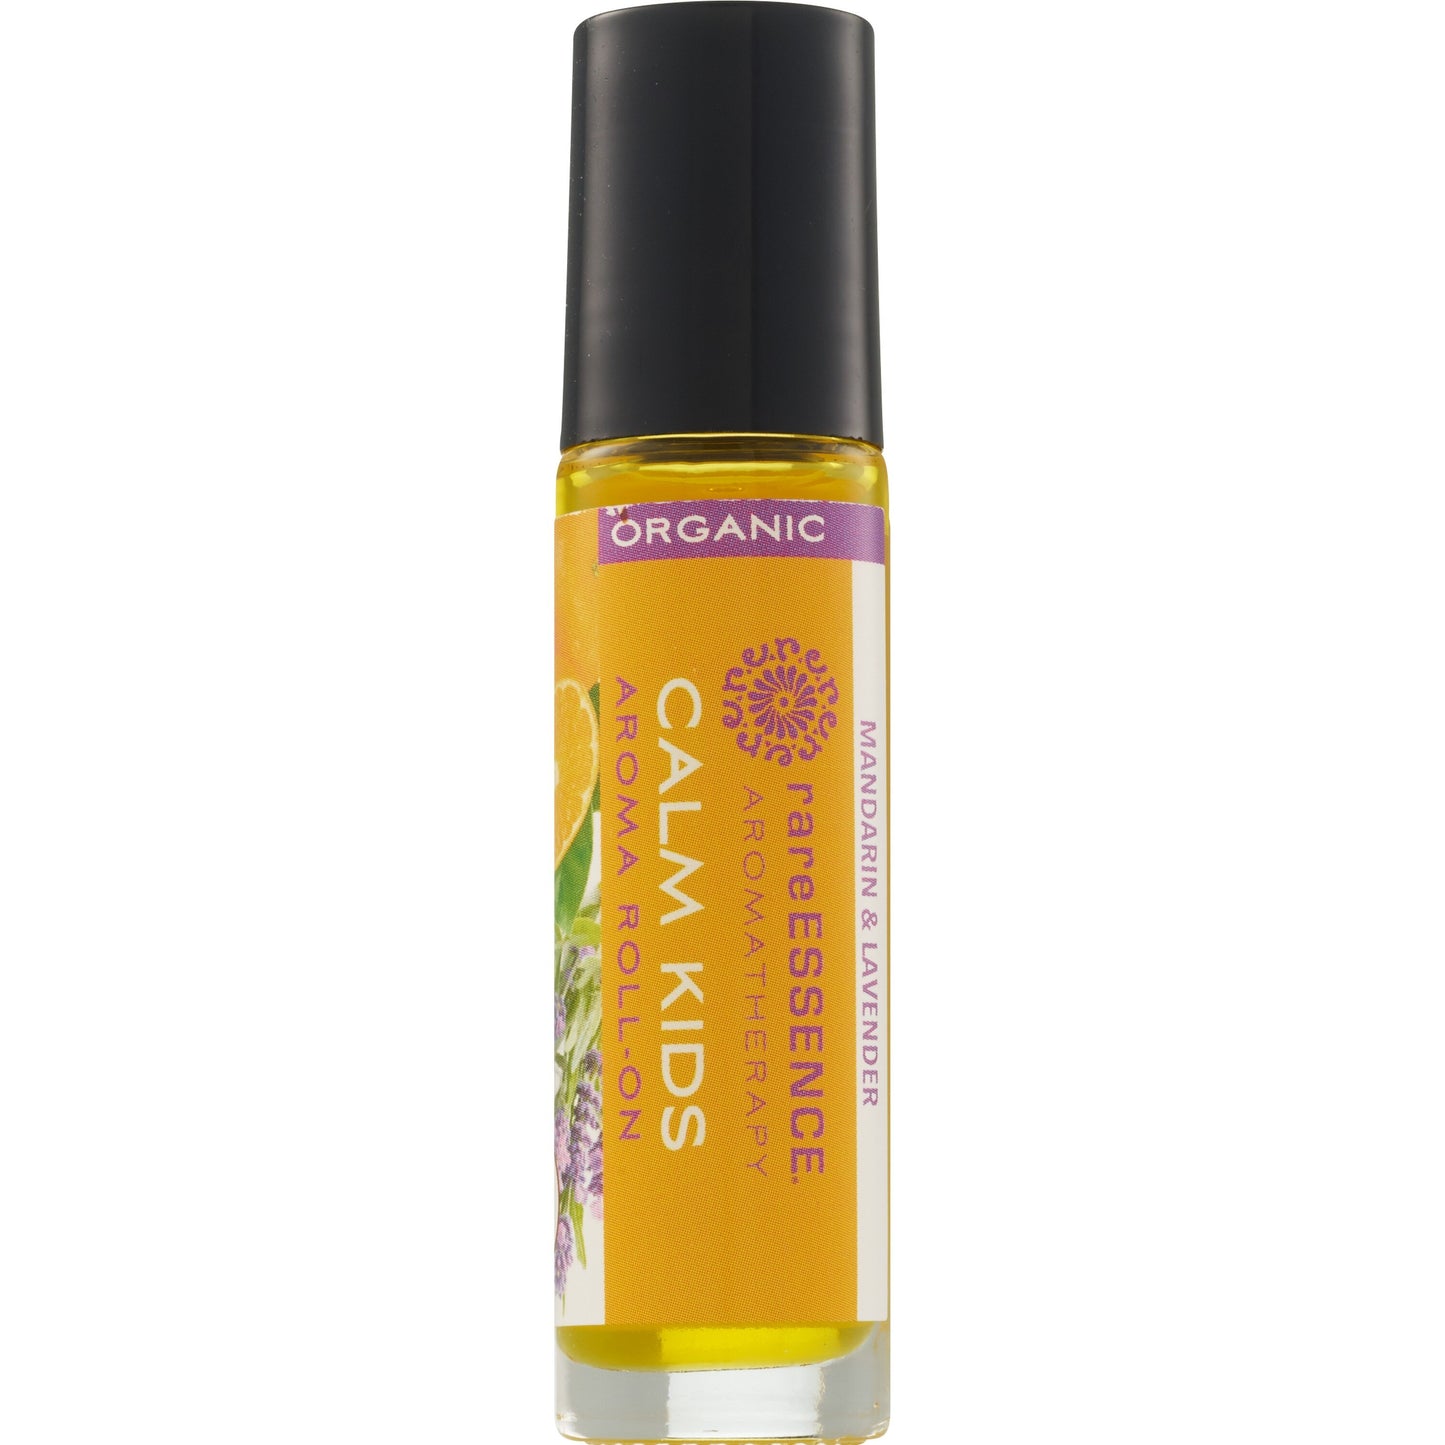 *FINAL SALE* Aromatherapy Roll-On Oil